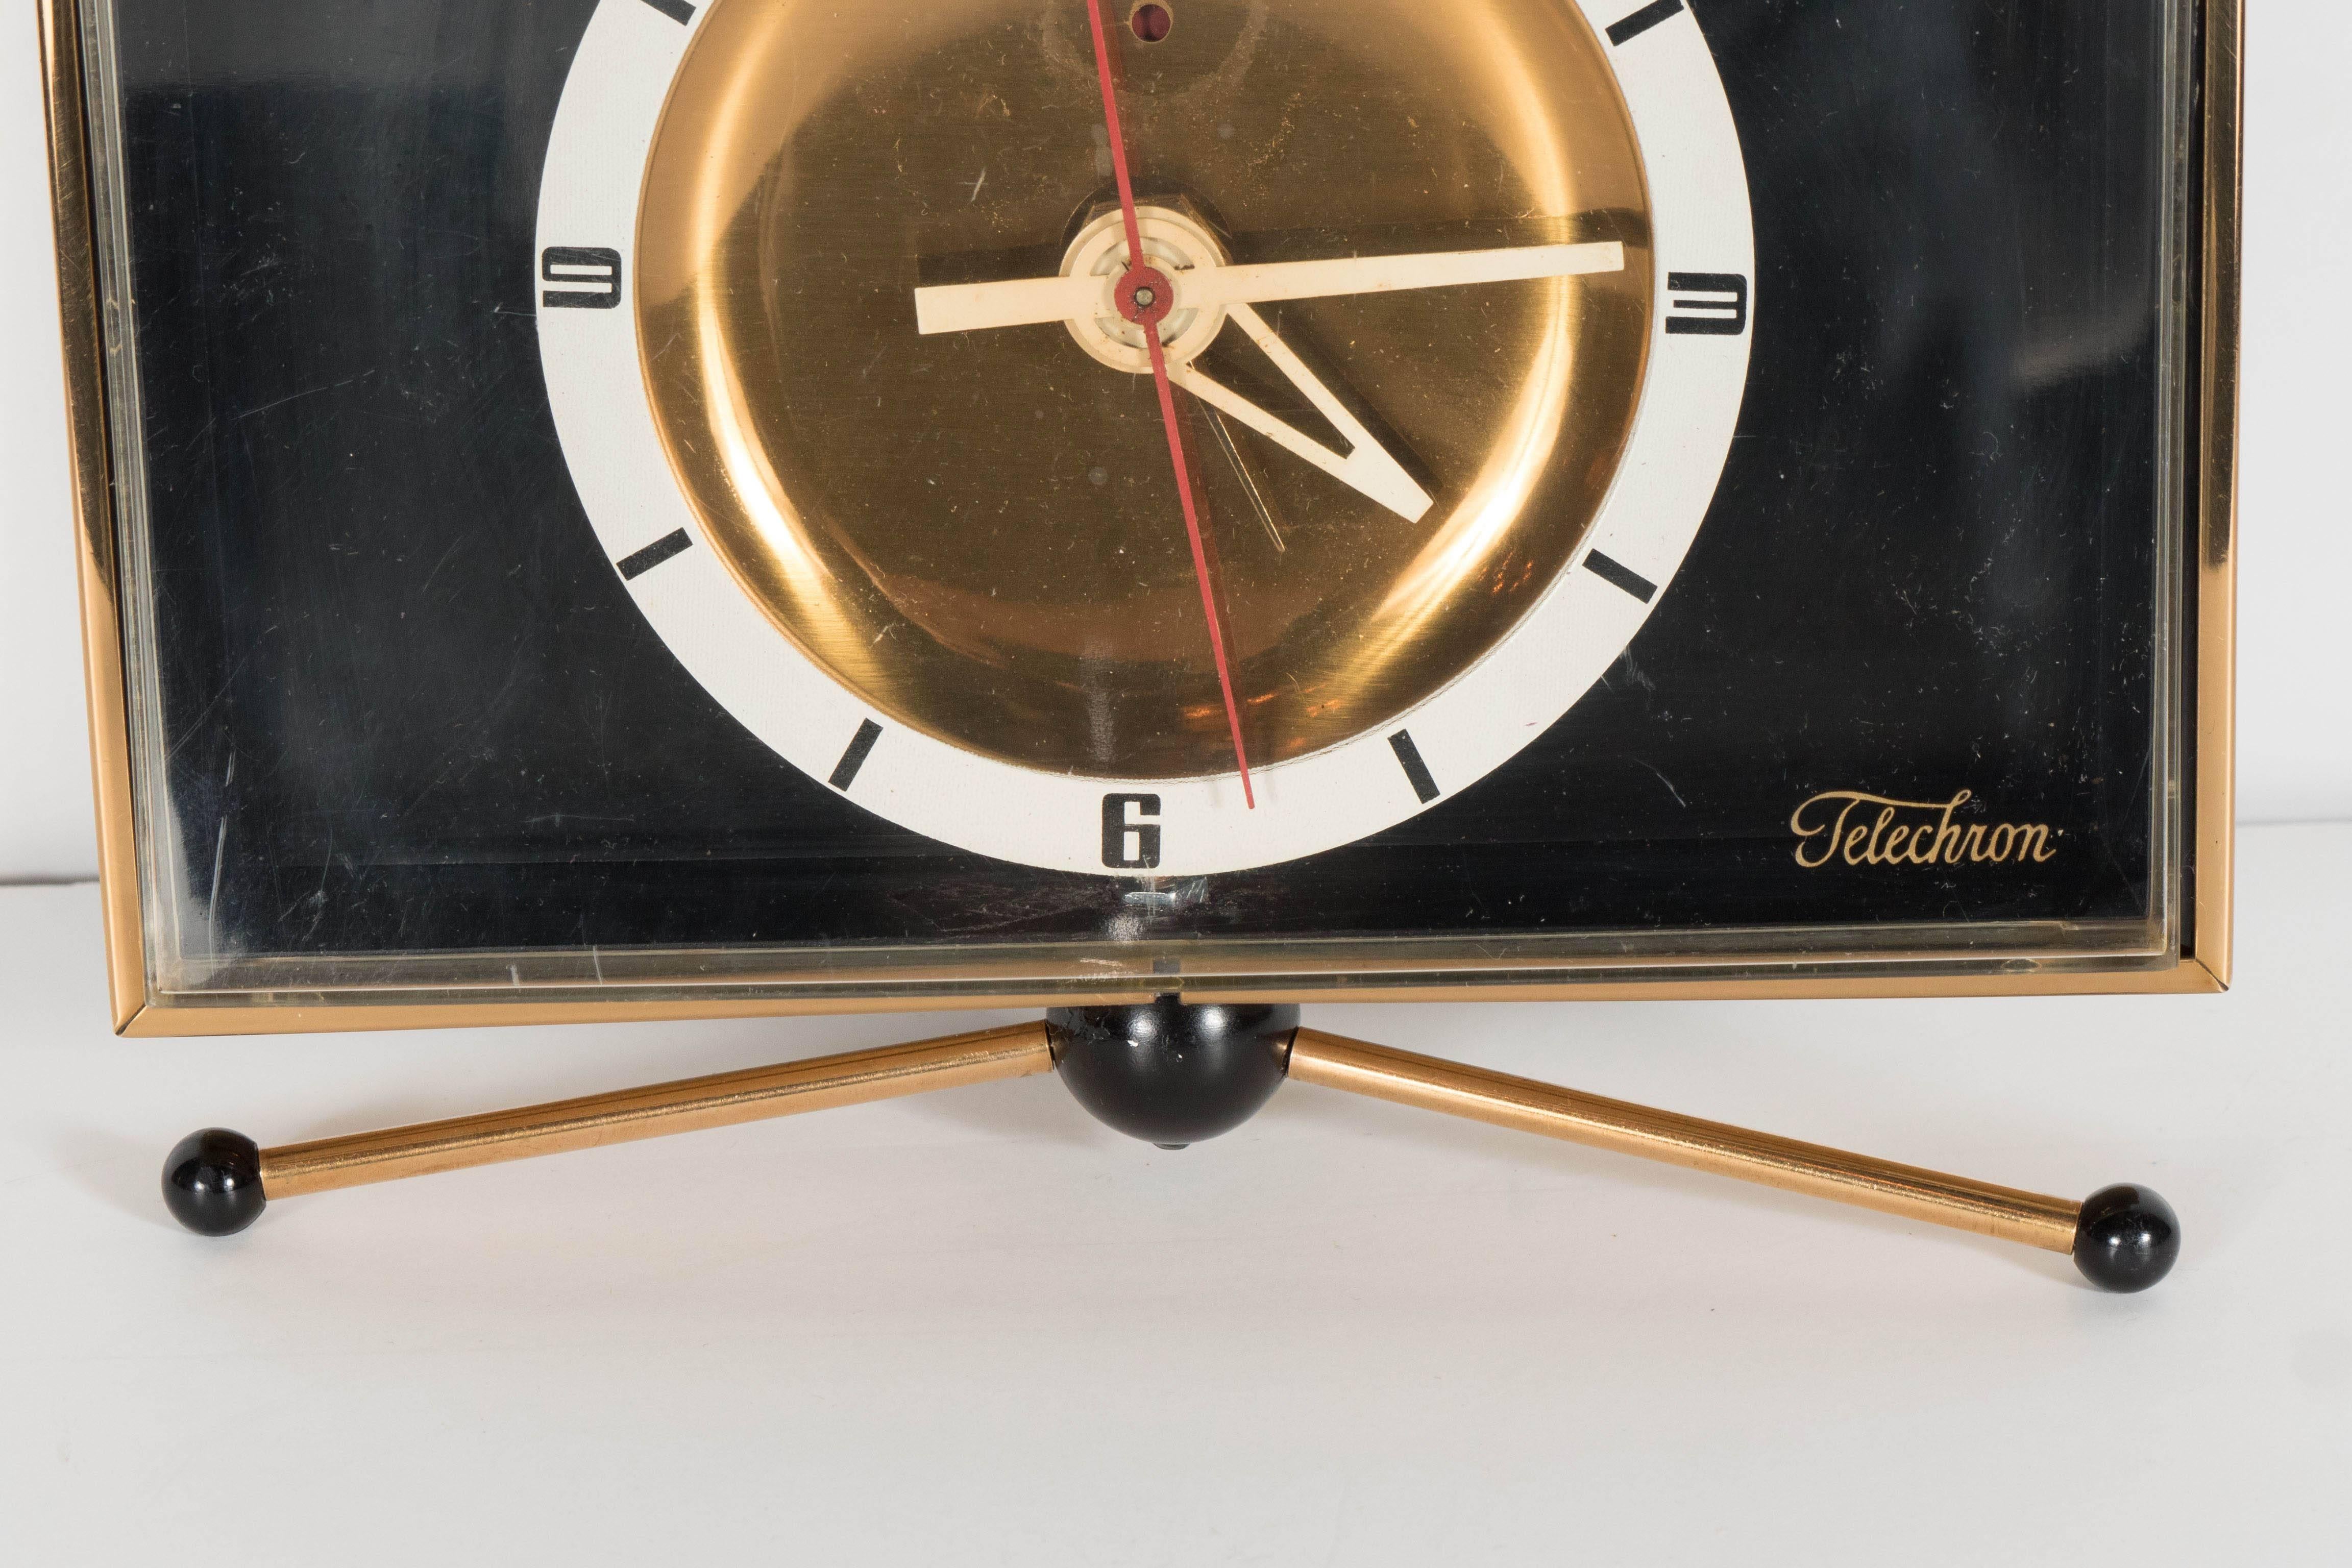 American Sophisticated Mid-Century Modernist Brass Clock on Pedestal by Telechron